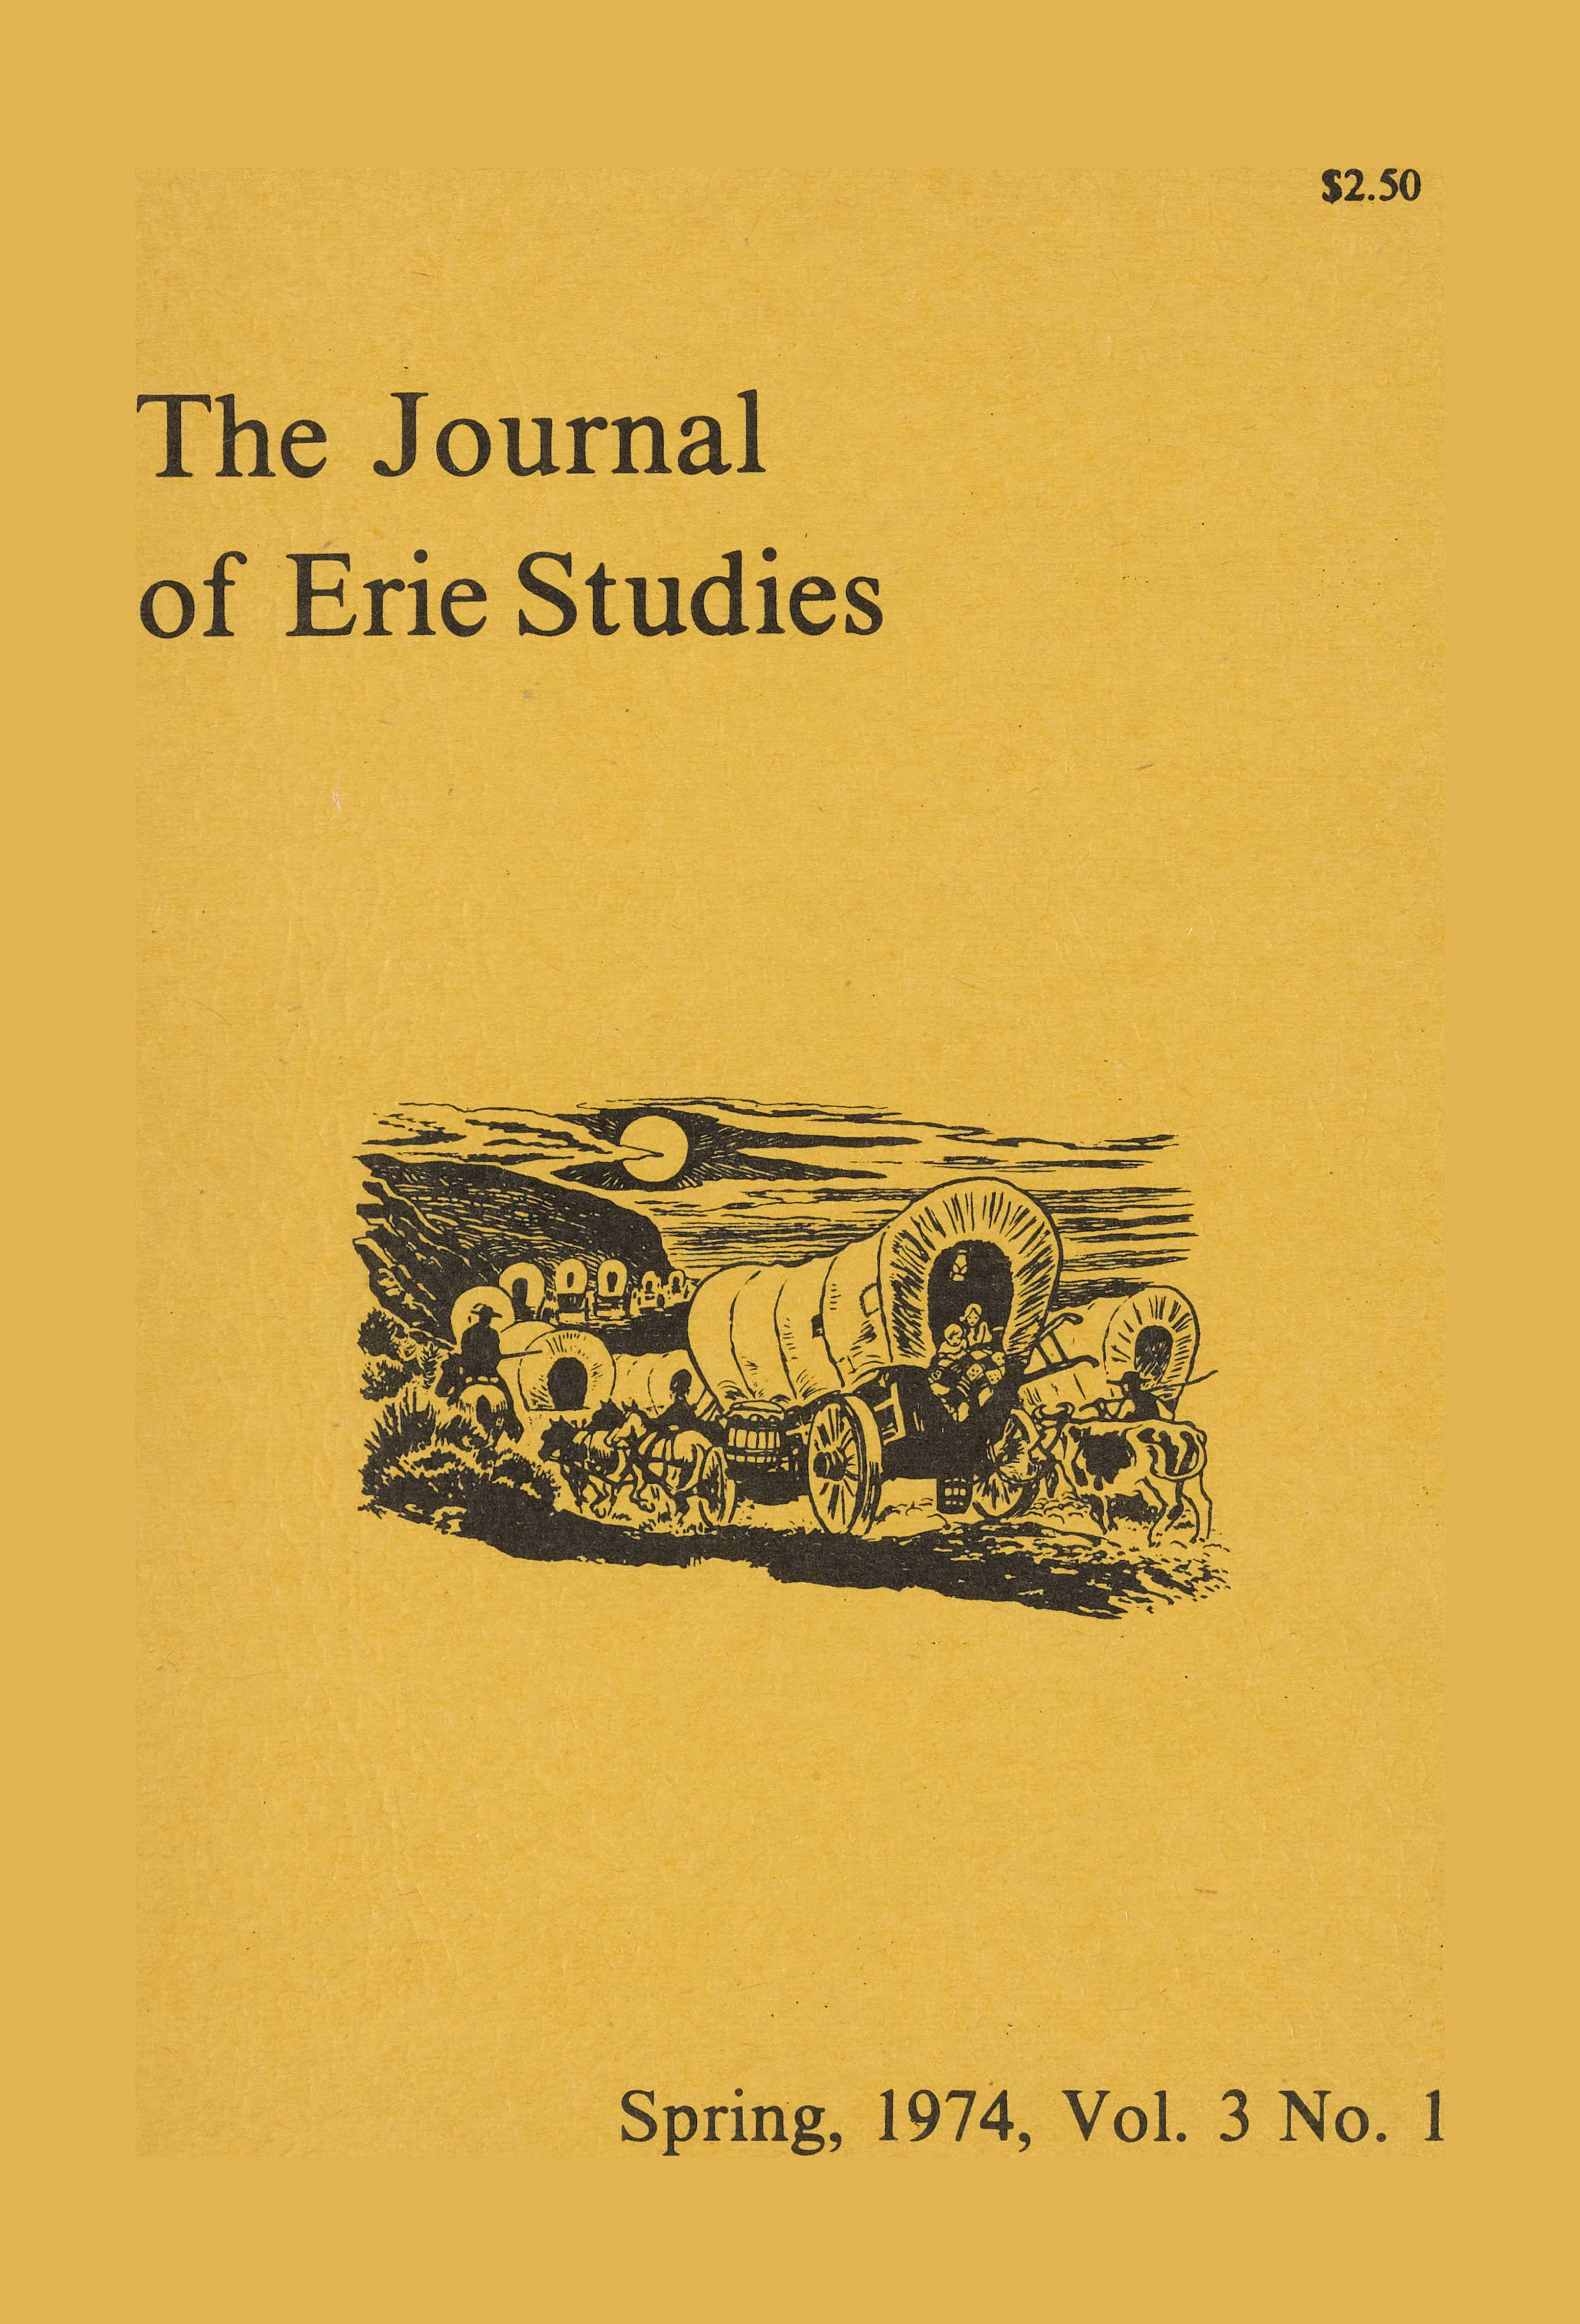 Cover of the spring 1974 issue of The Journal of Erie Studies.